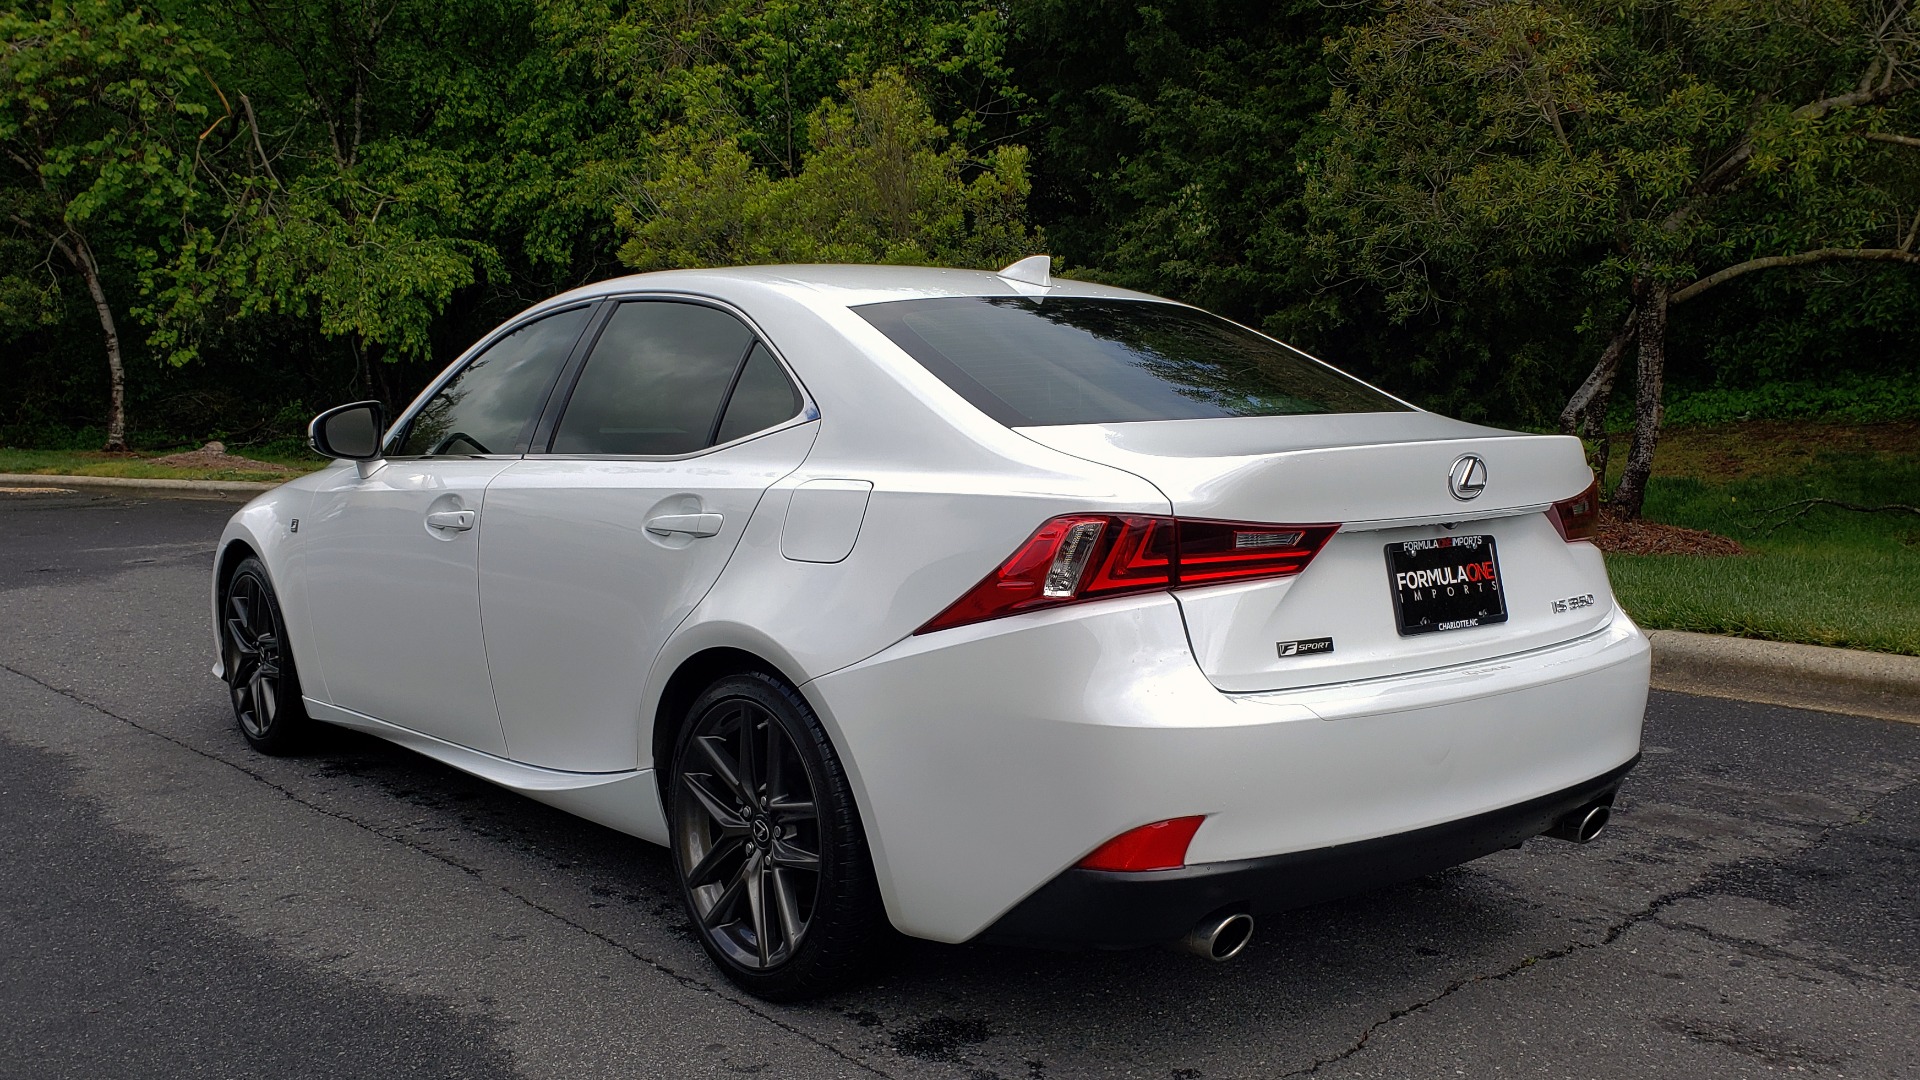 Used 2014 Lexus IS 350 F-SPORT / NAV / SUNROOF / REARVIEW / BSM / MARK LEV SND for sale Sold at Formula Imports in Charlotte NC 28227 3